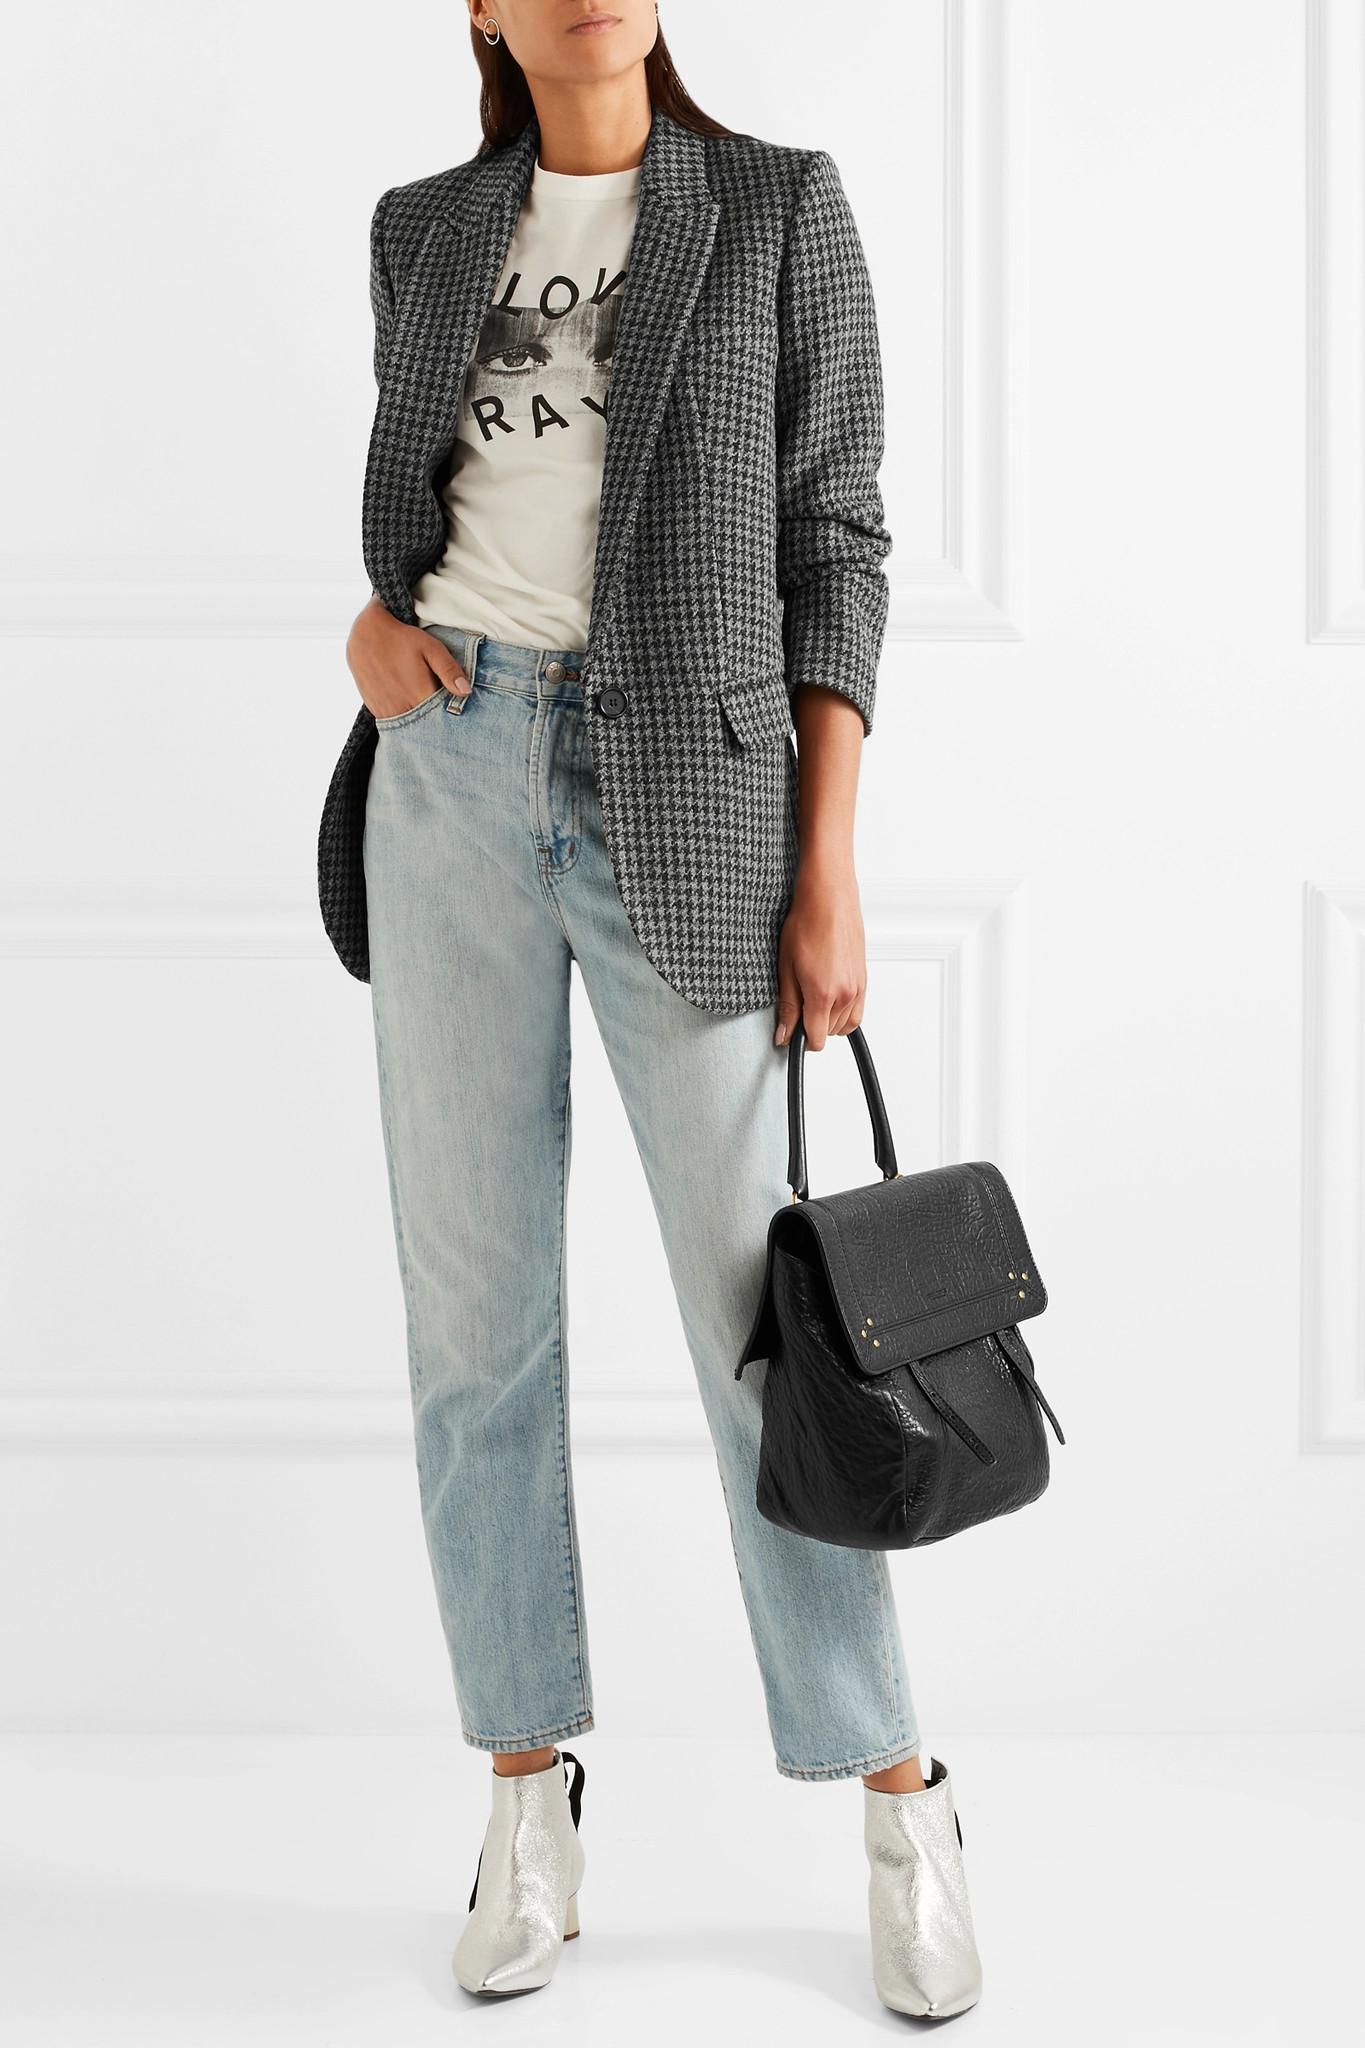 Étoile Isabel Marant Ice Houndstooth Wool-blend Blazer in Gray - Lyst